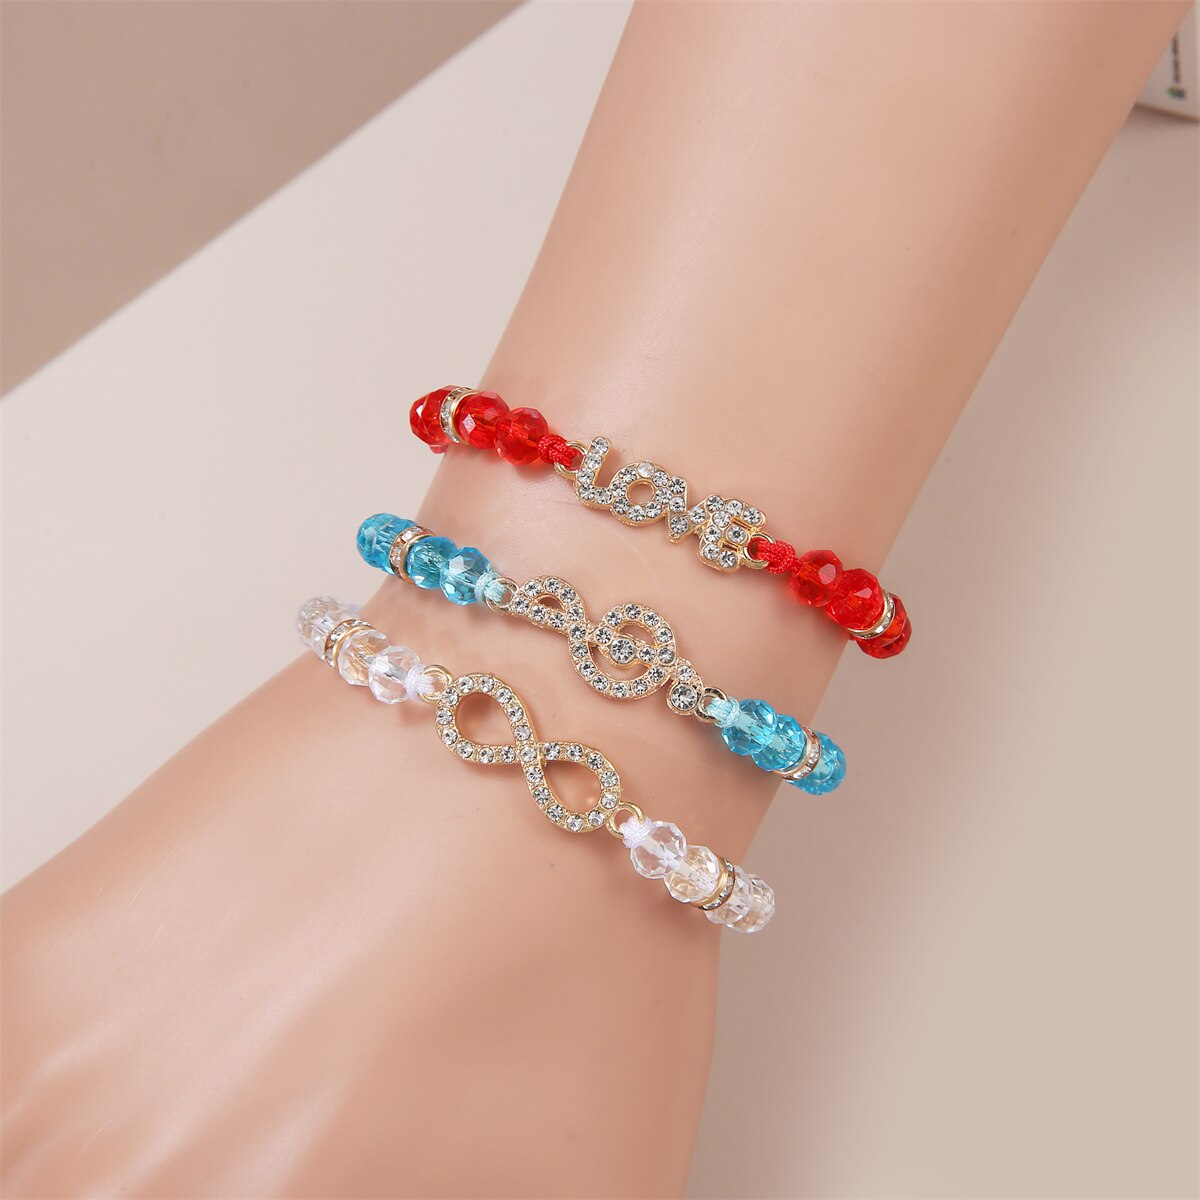 12pcs/lot Butterfly Turtle Charms Knitted Bracelet for Women Adjustable Infinite Love Crystal Beads Bracelets Anklet Jewelry